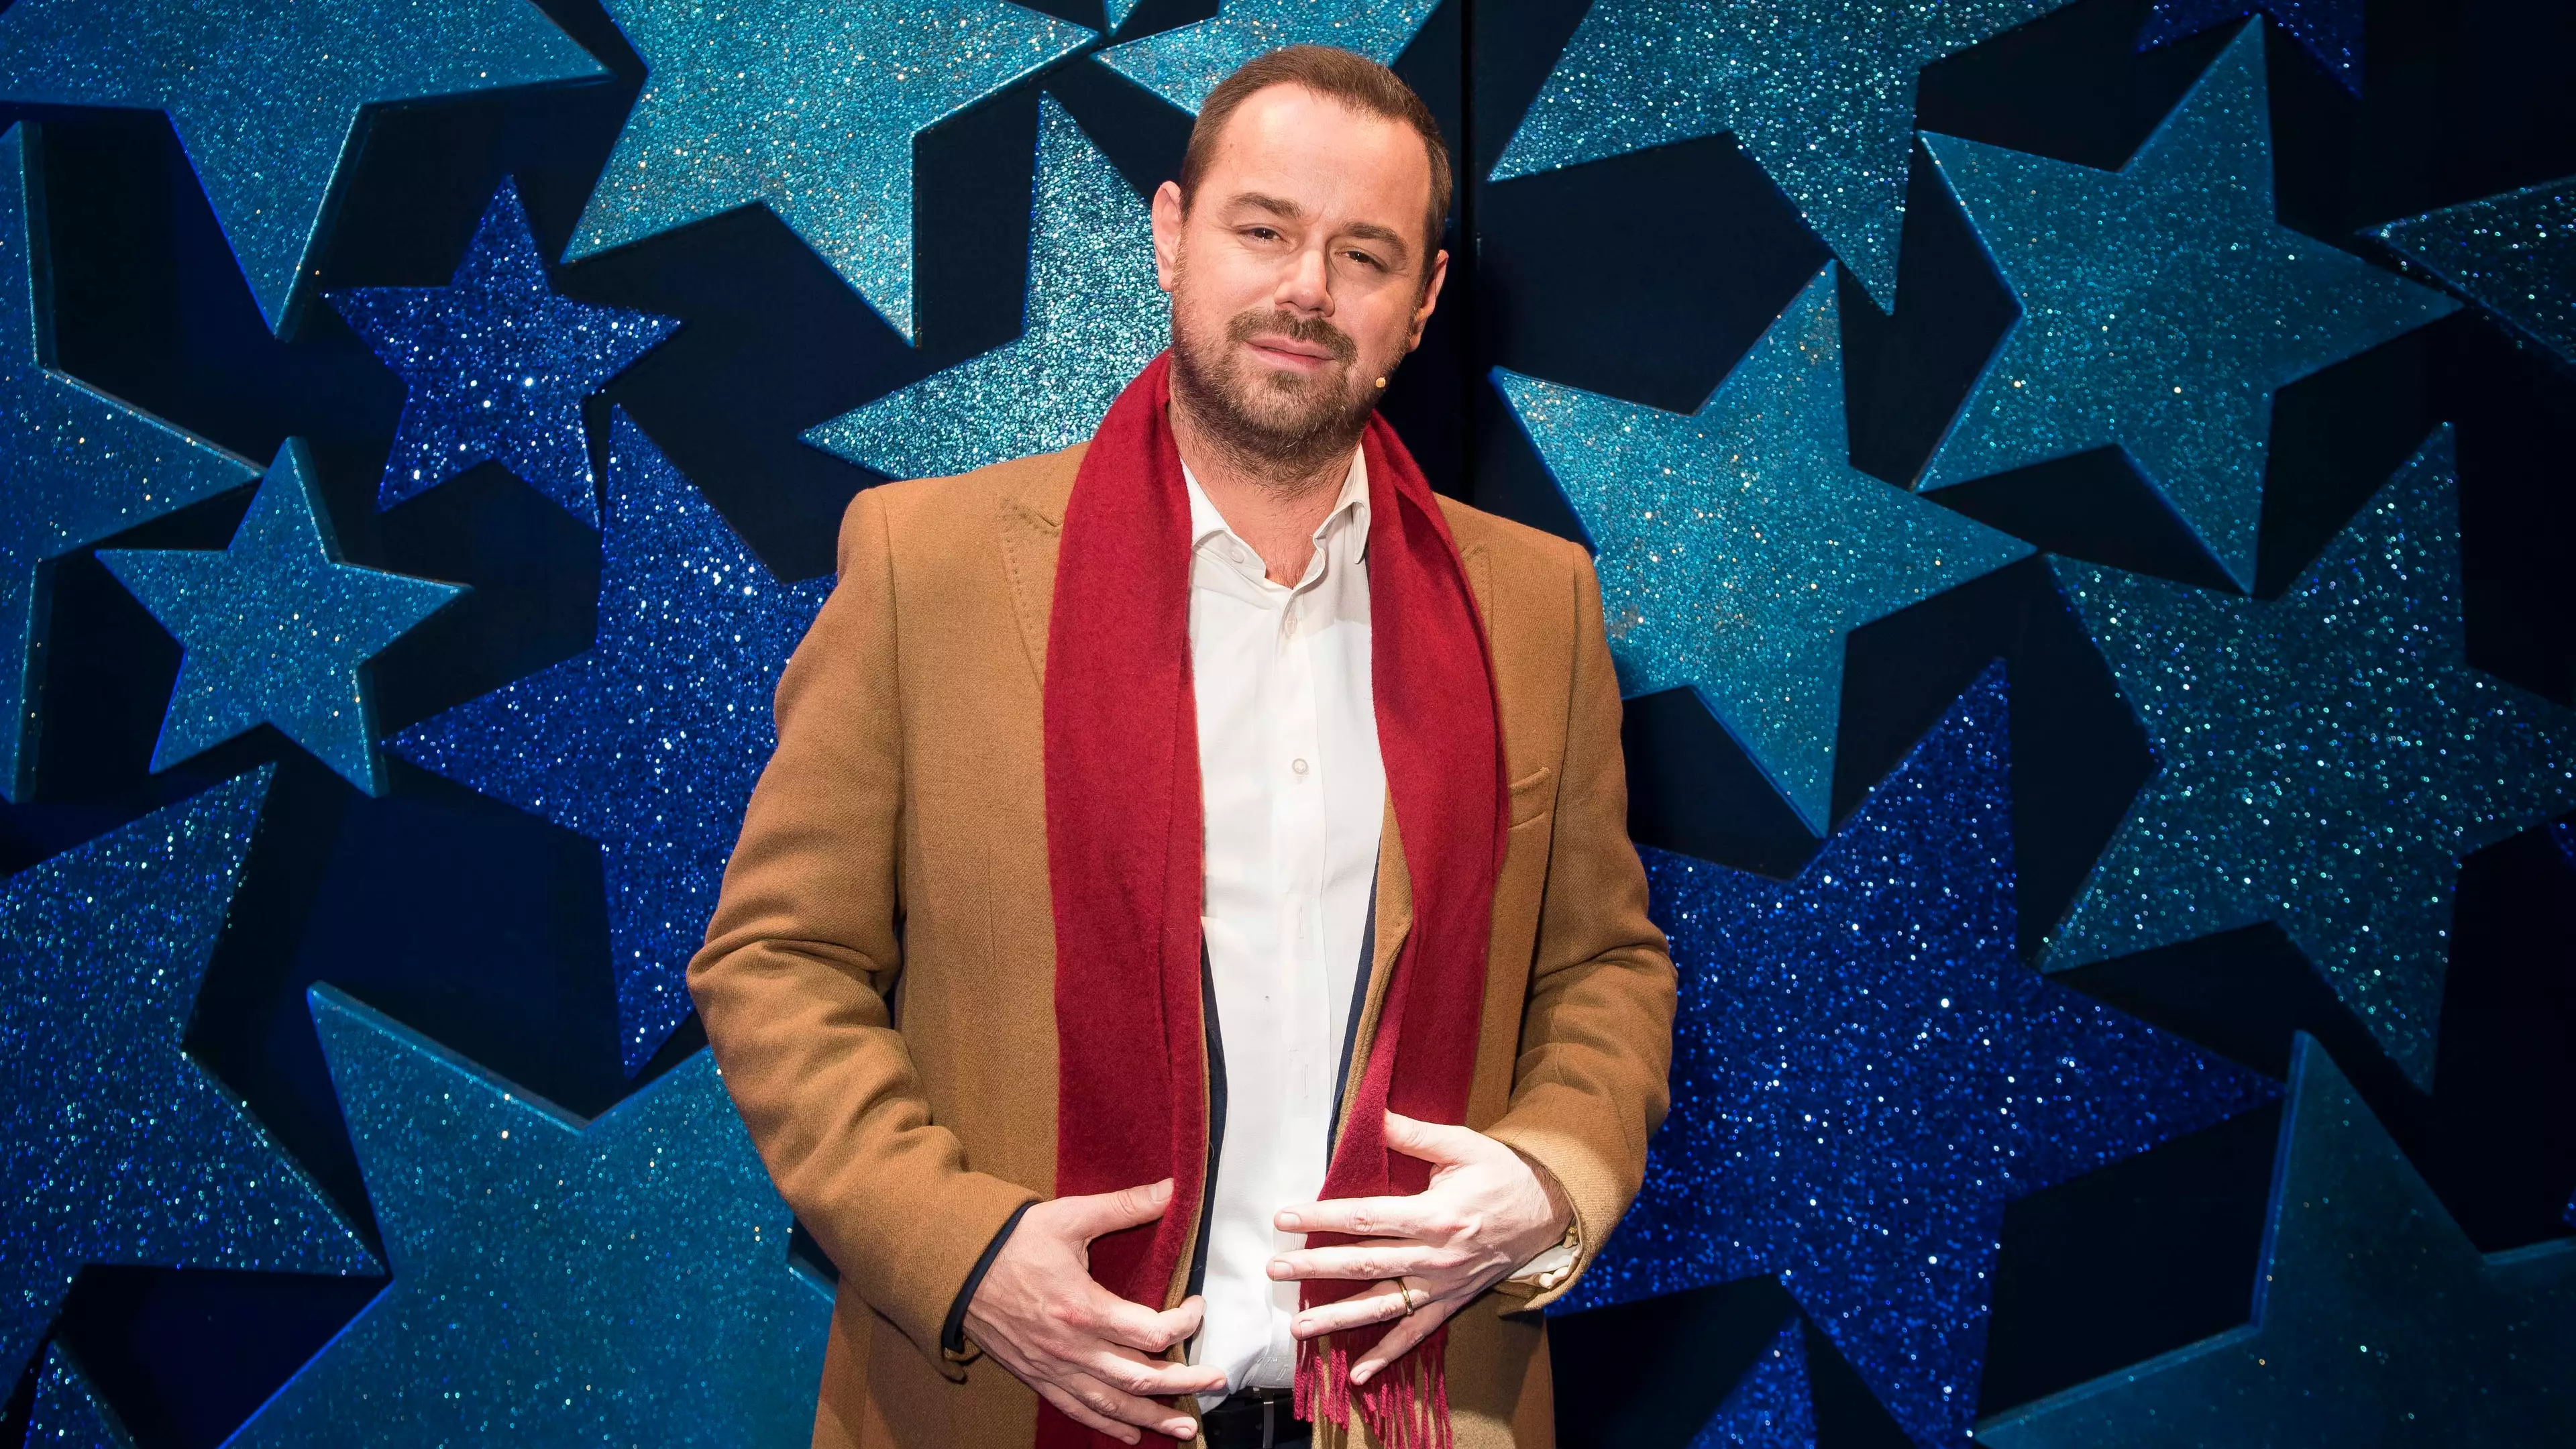 Danny Dyer Delivered Channel 4's 'Alternative Christmas Message' And We Should All Listen Up